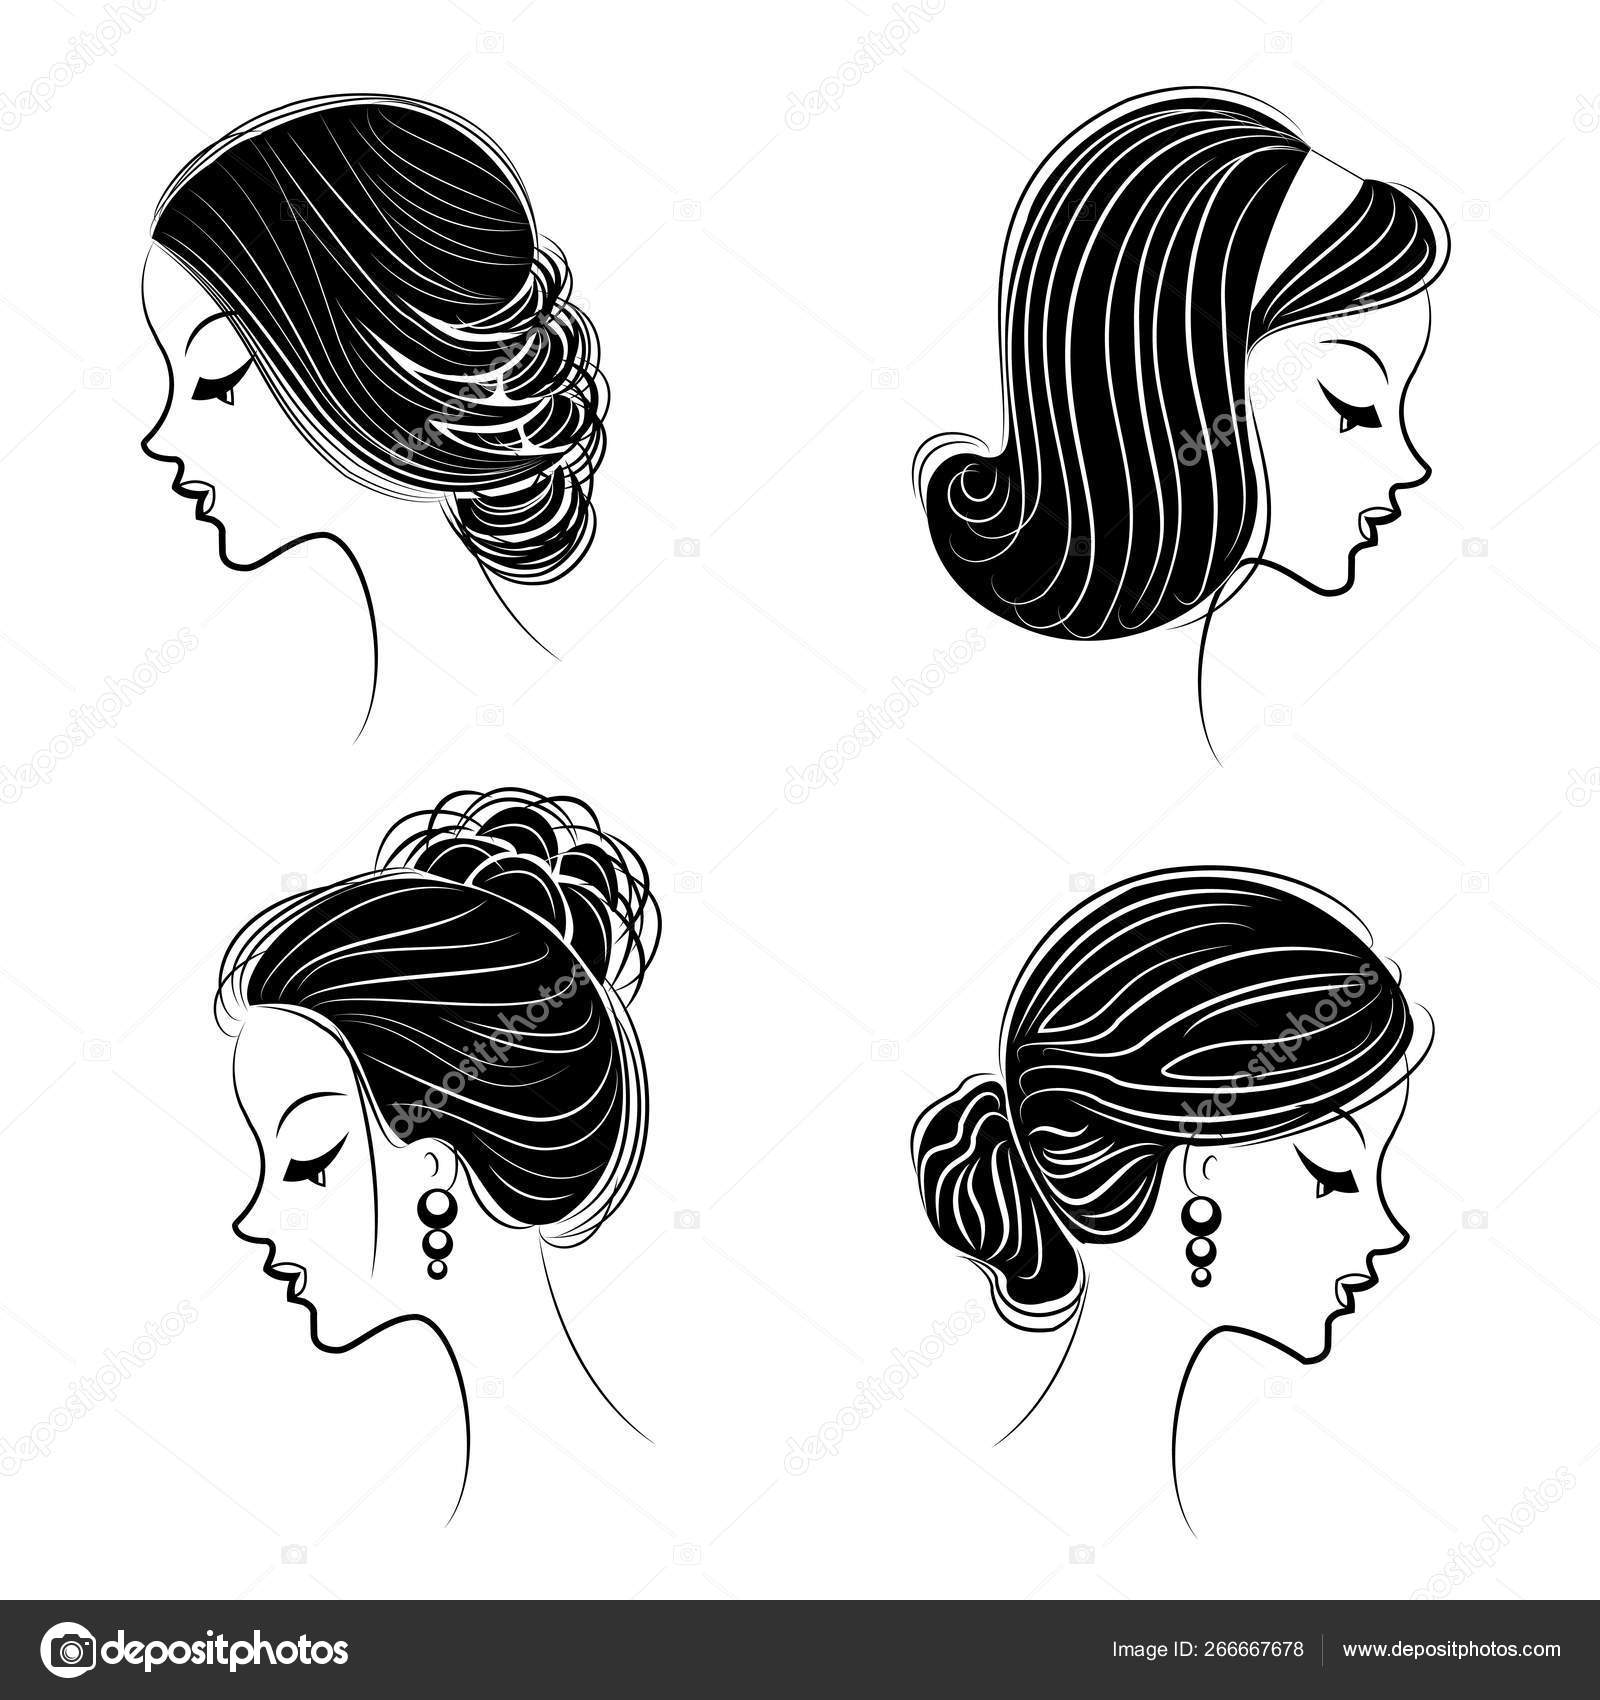 1 022 Hairstyles For Girls Vectors Royalty Free Vector Hairstyles For Girls Images Depositphotos